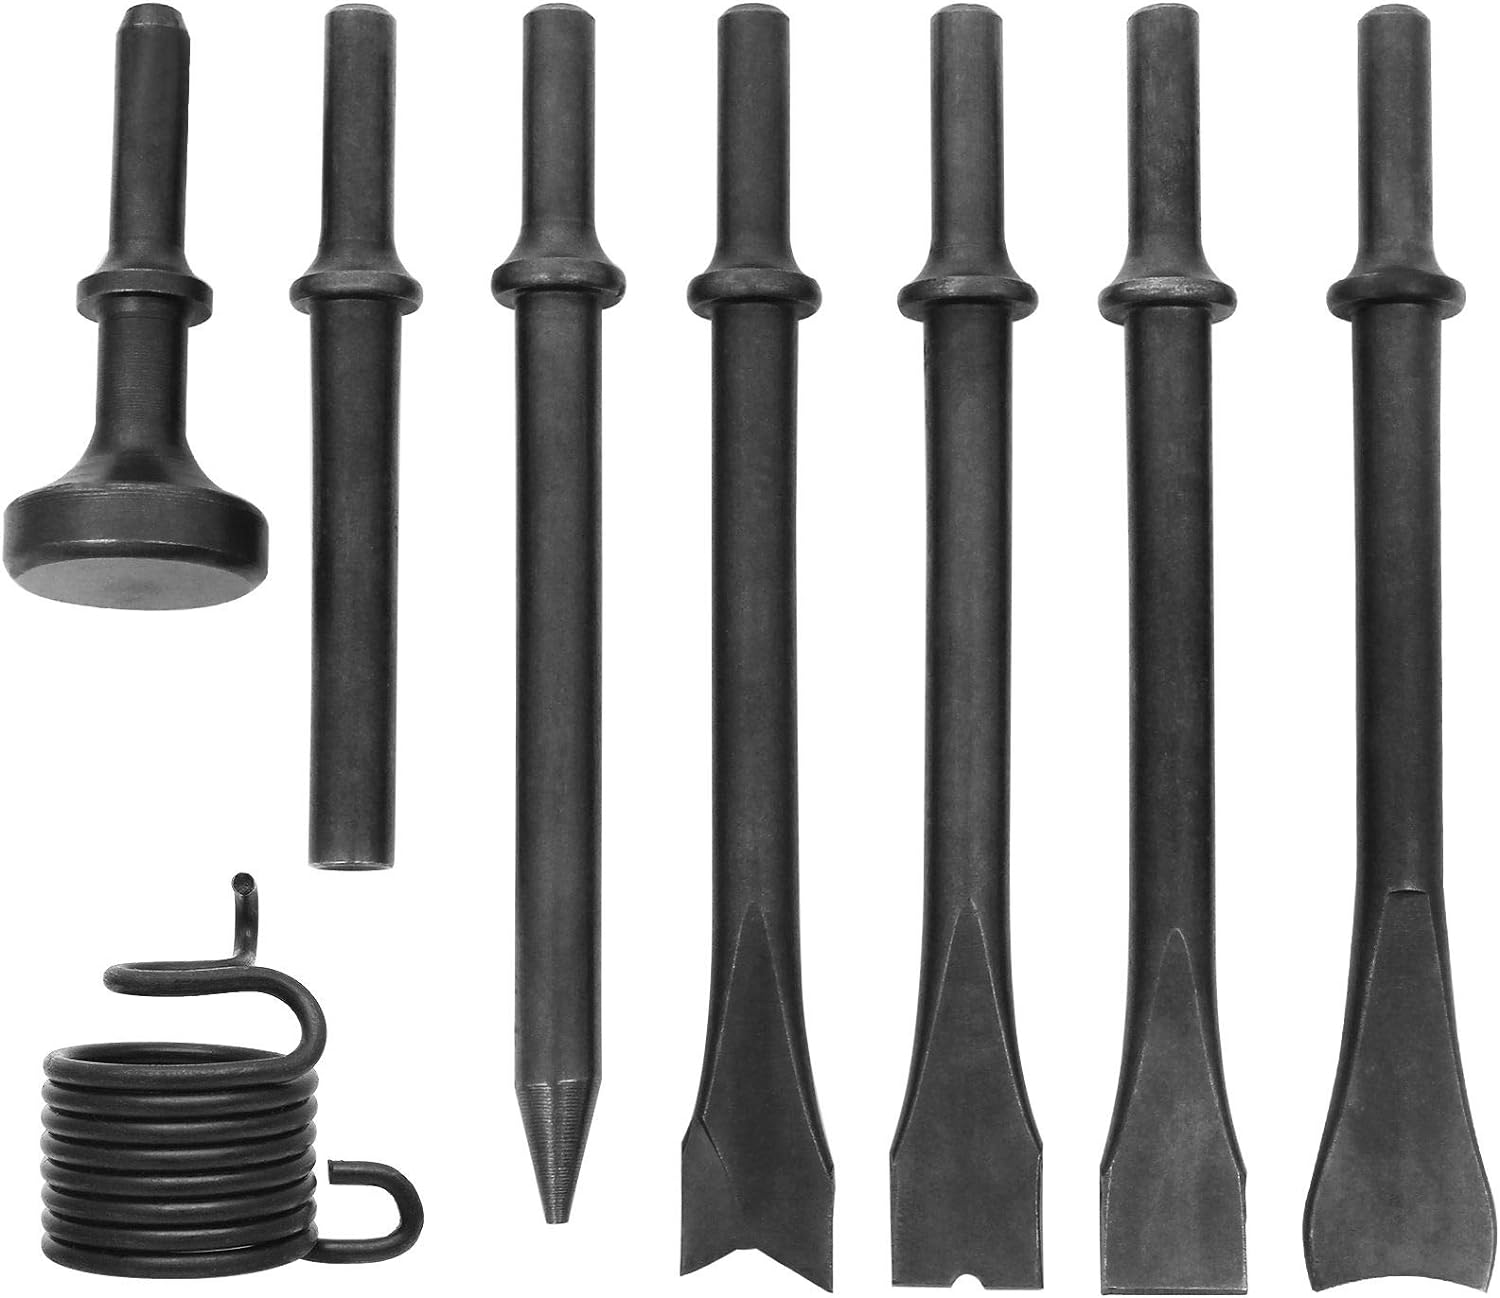 wencheng 8 PCS Heavy Duty Pneumatic Chisel Air Hammer Punch Chipping Bits Set Fit for 150/190/250 Air Hammer, Chipping Bits Set for Maso